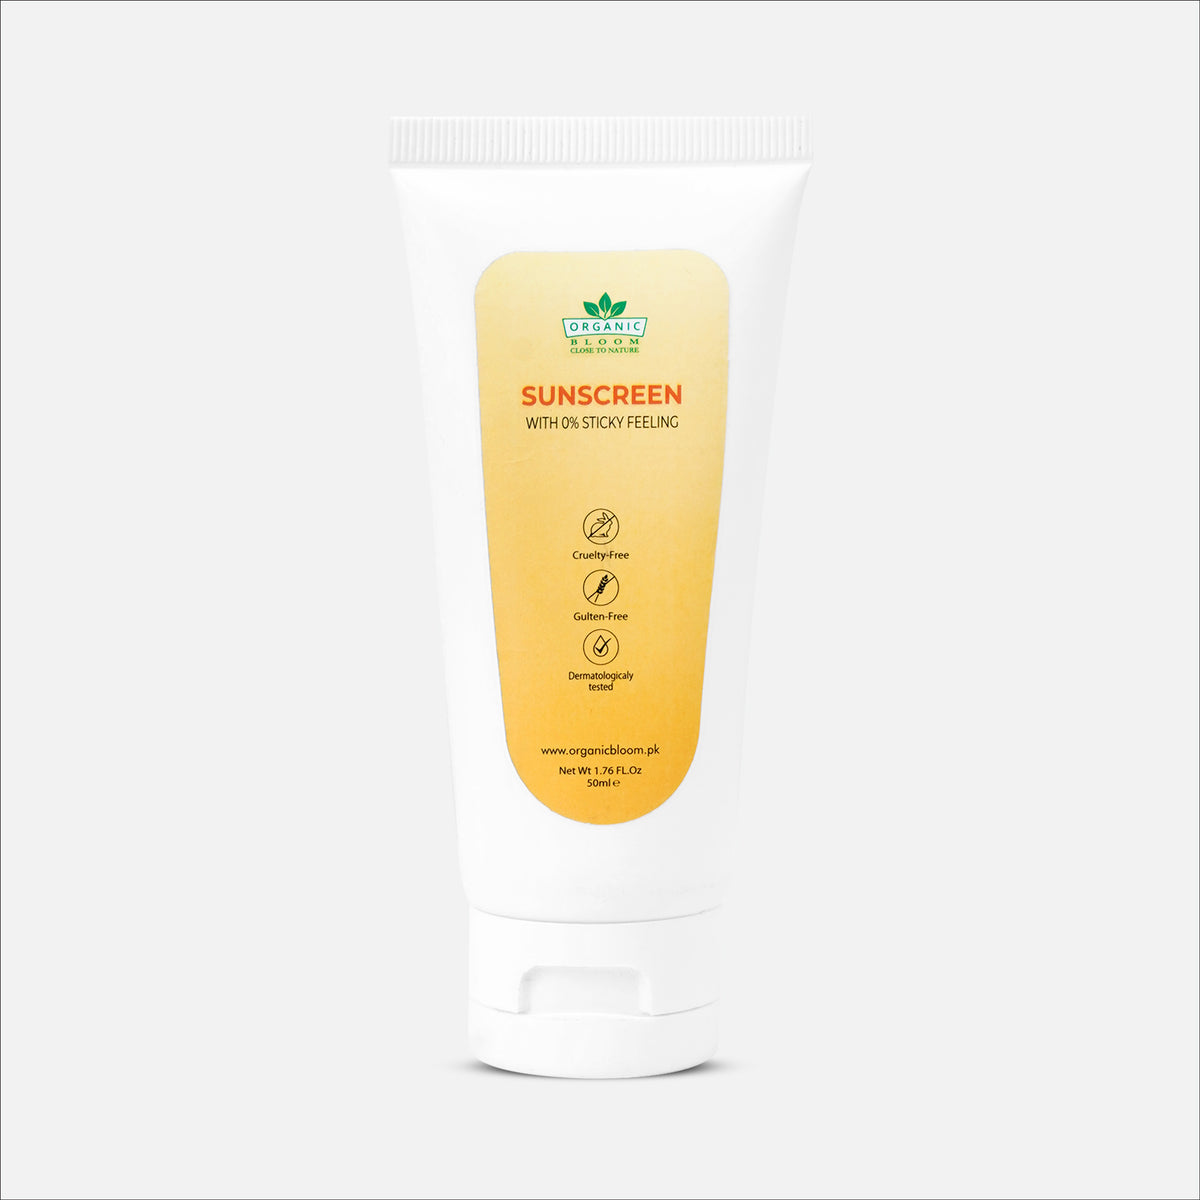 SUNSCREEN WITH 0% STICKY FEELING